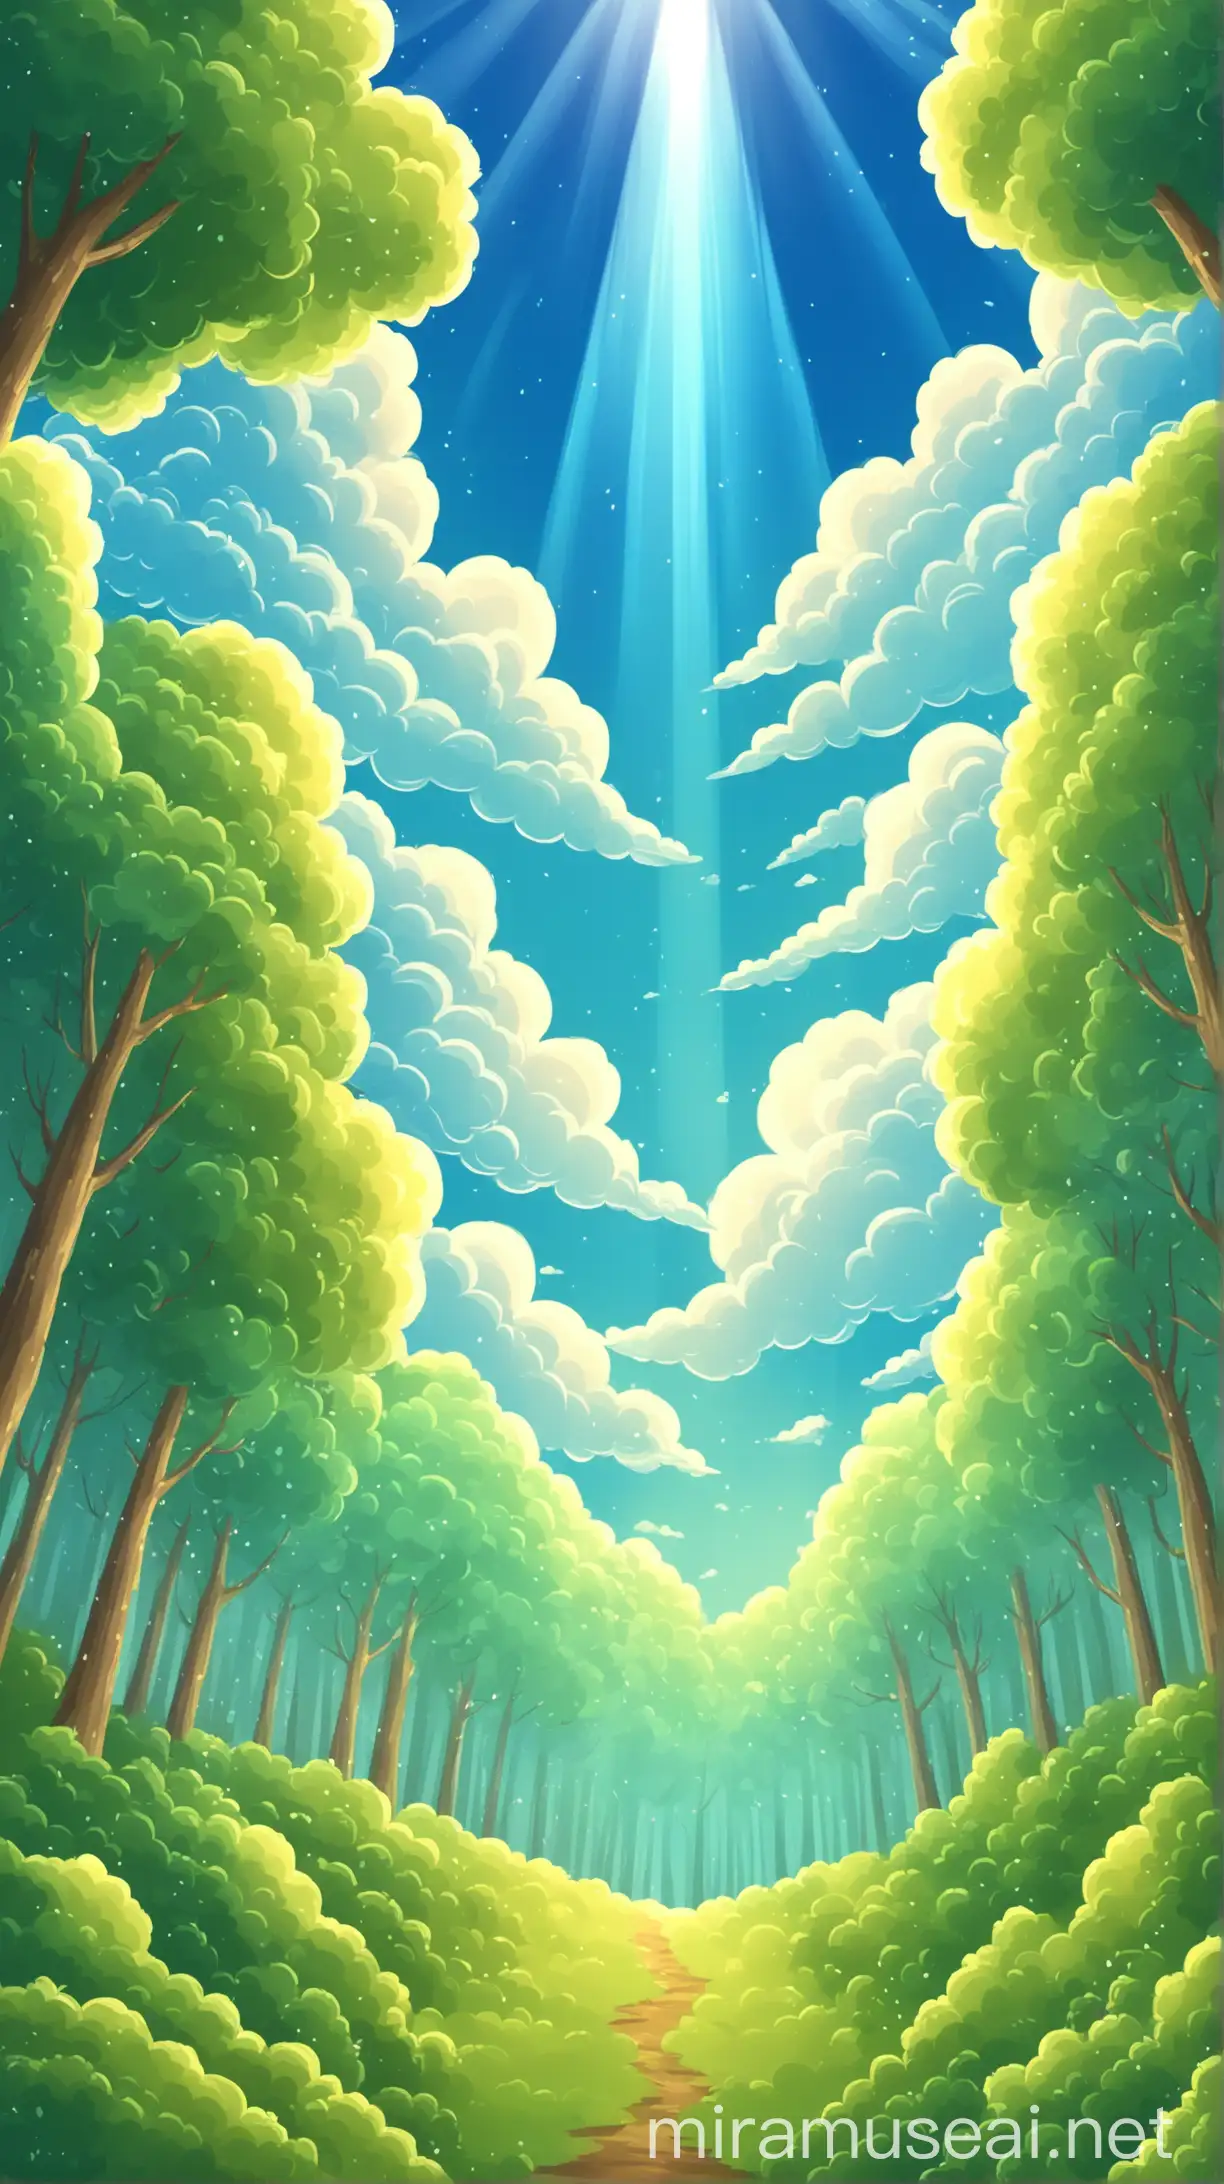  forest with blue sky  clouds ray light mix clouds backgrounds cartoonish